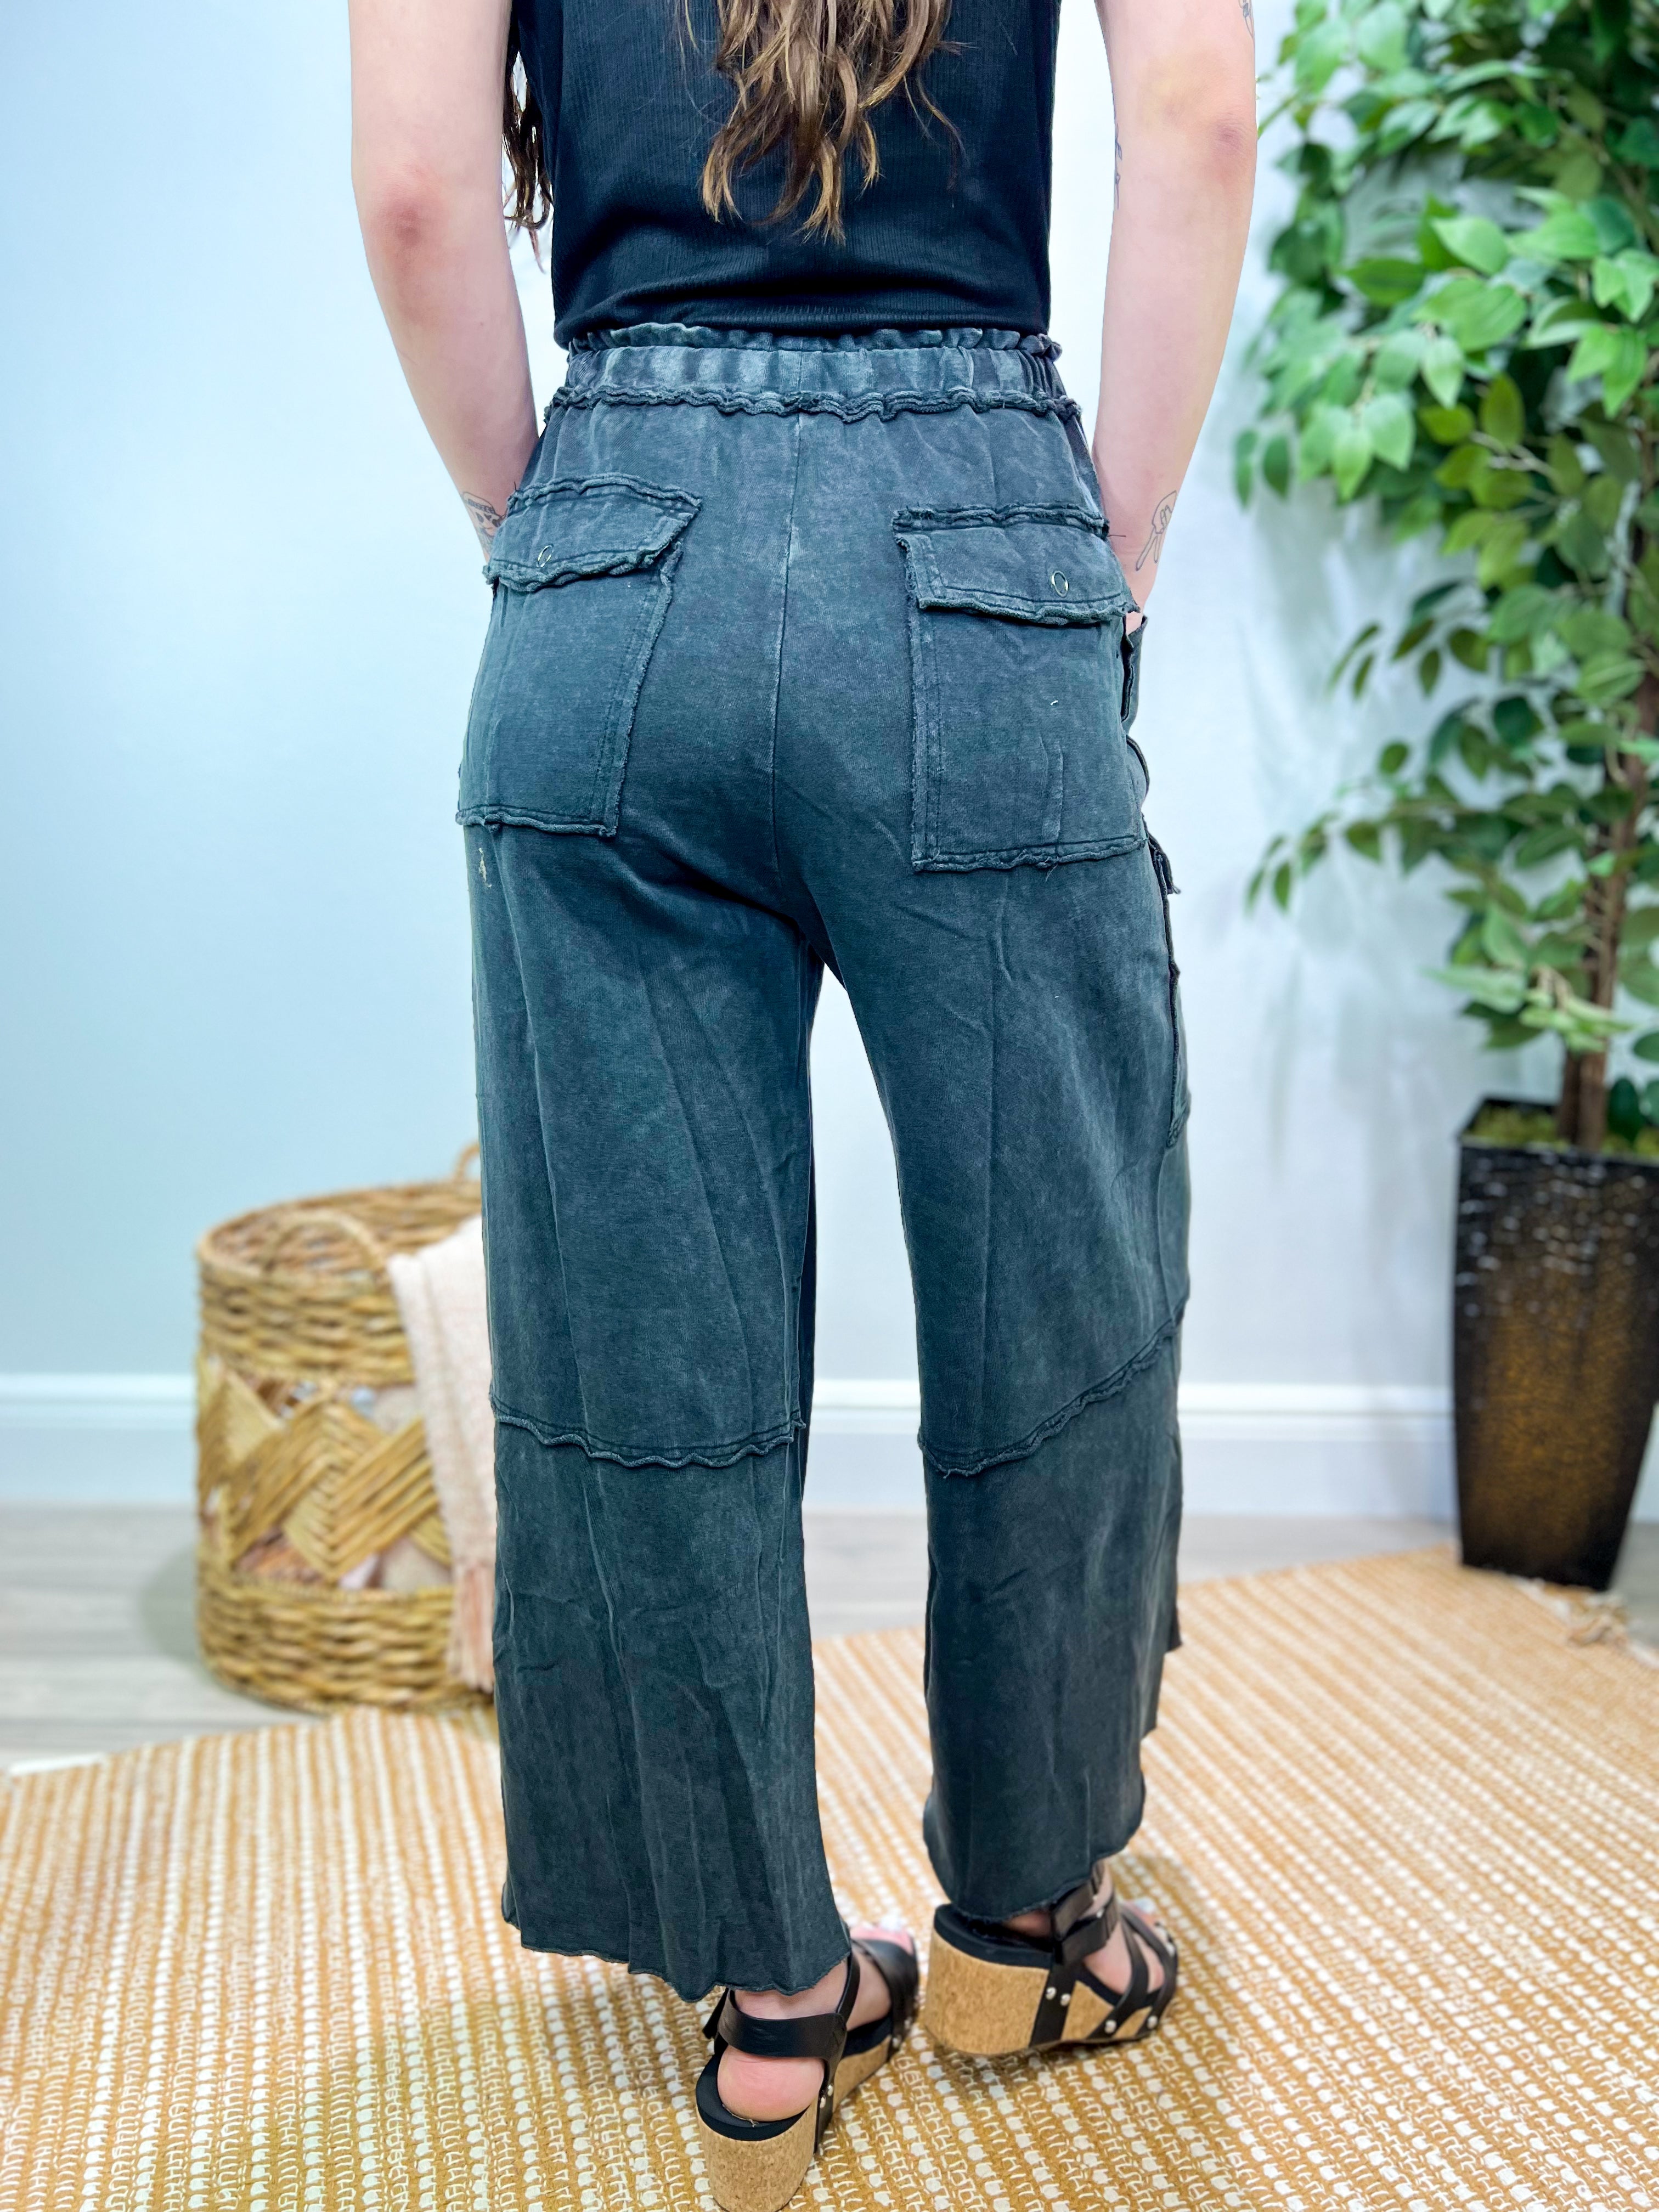 RESTOCK : Feeling Good Utility Pull On Pants-150 PANTS-Easel-Heathered Boho Boutique, Women's Fashion and Accessories in Palmetto, FL